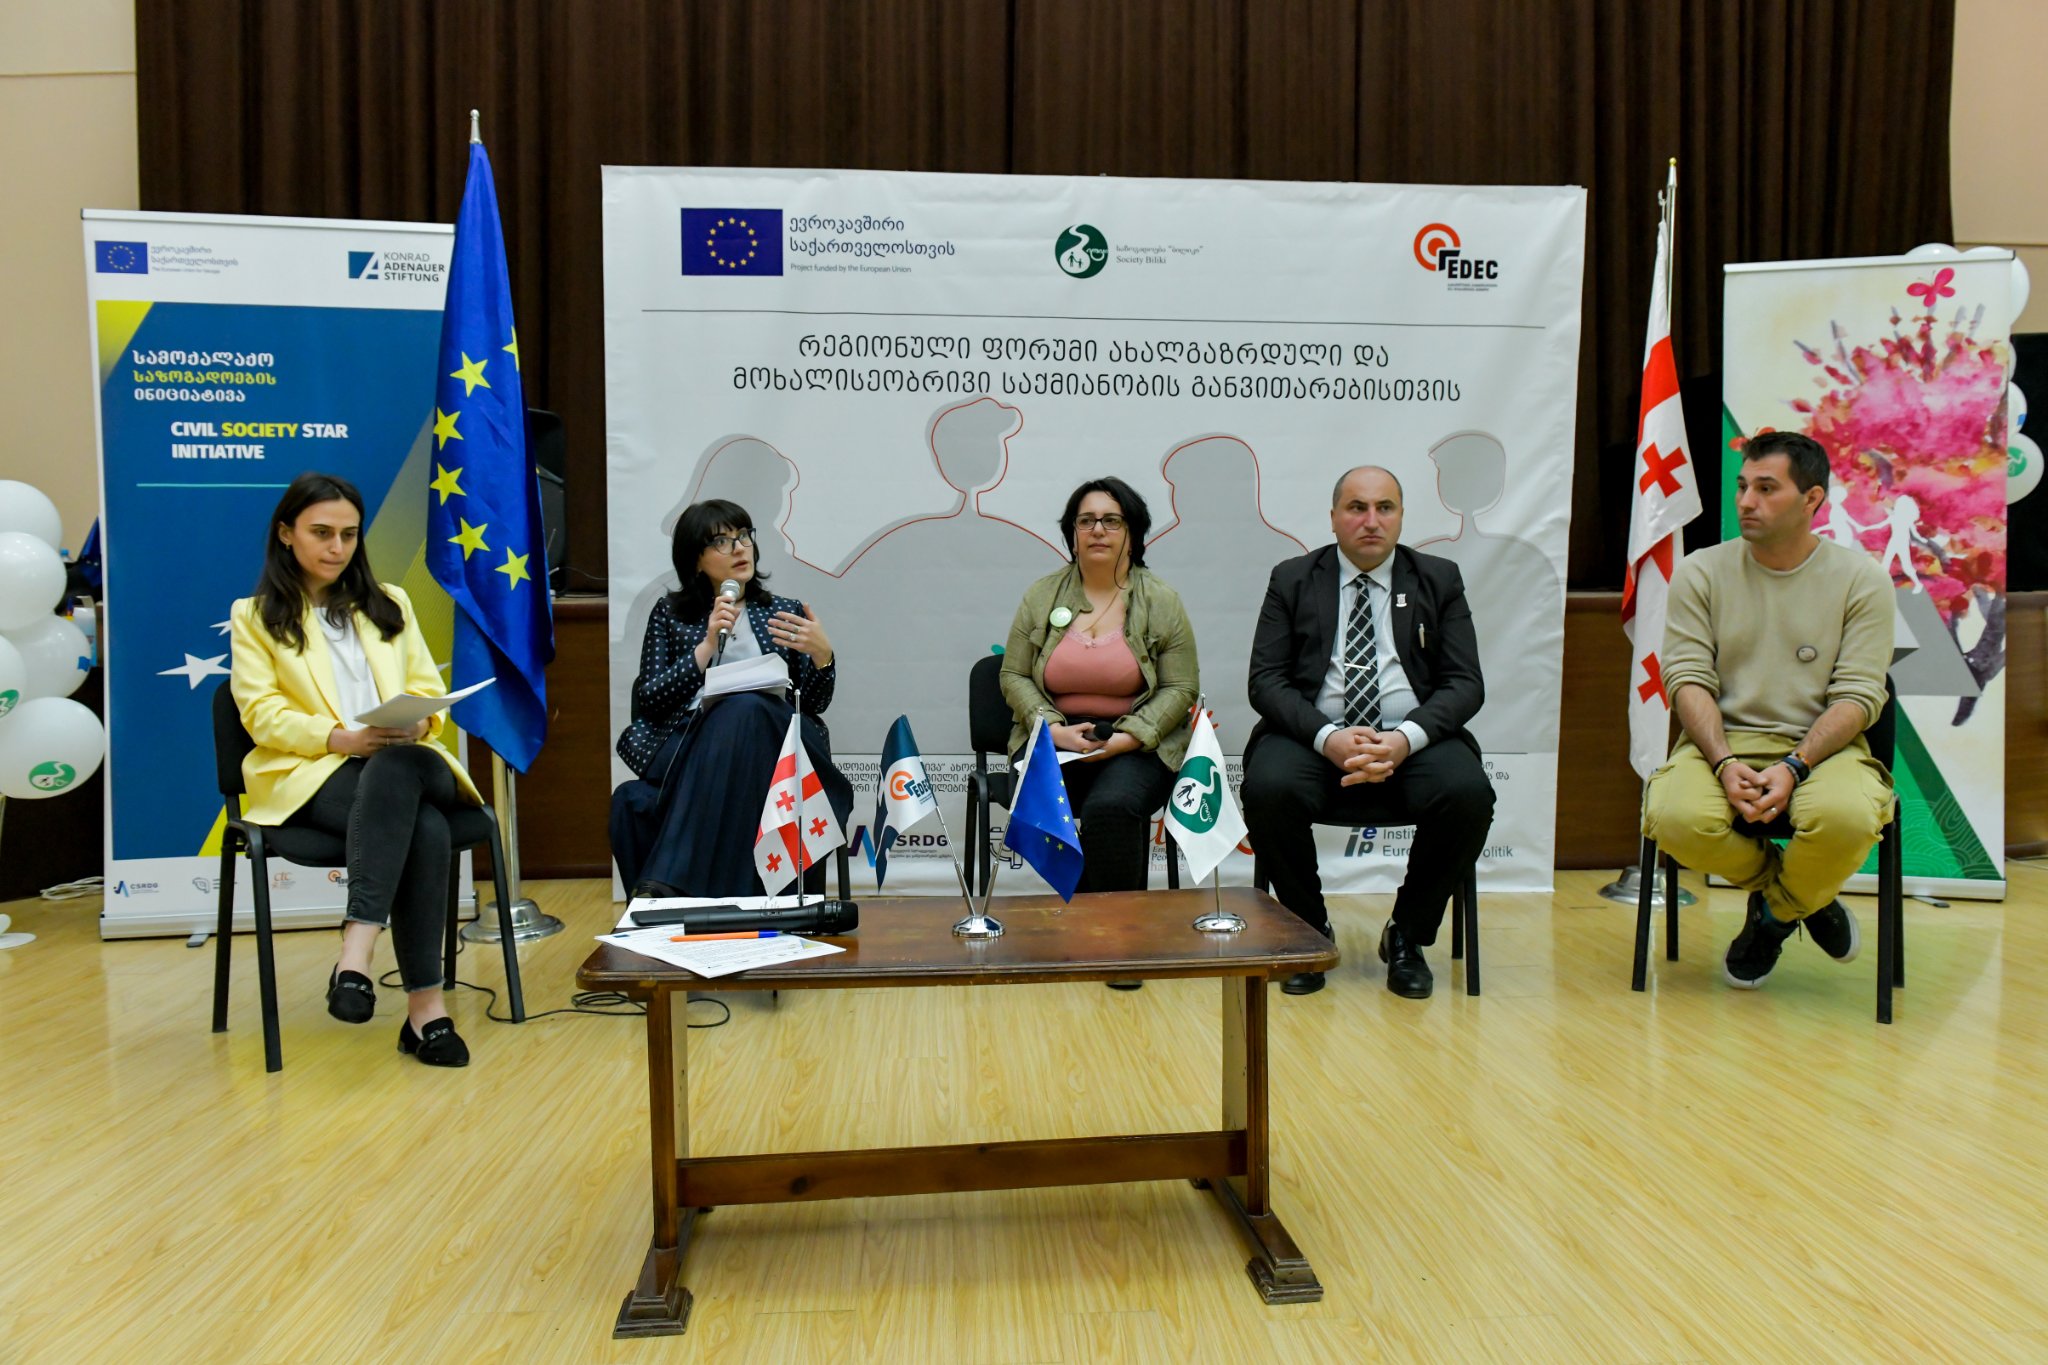 The Regional Forum for Youth and Voluntary Development